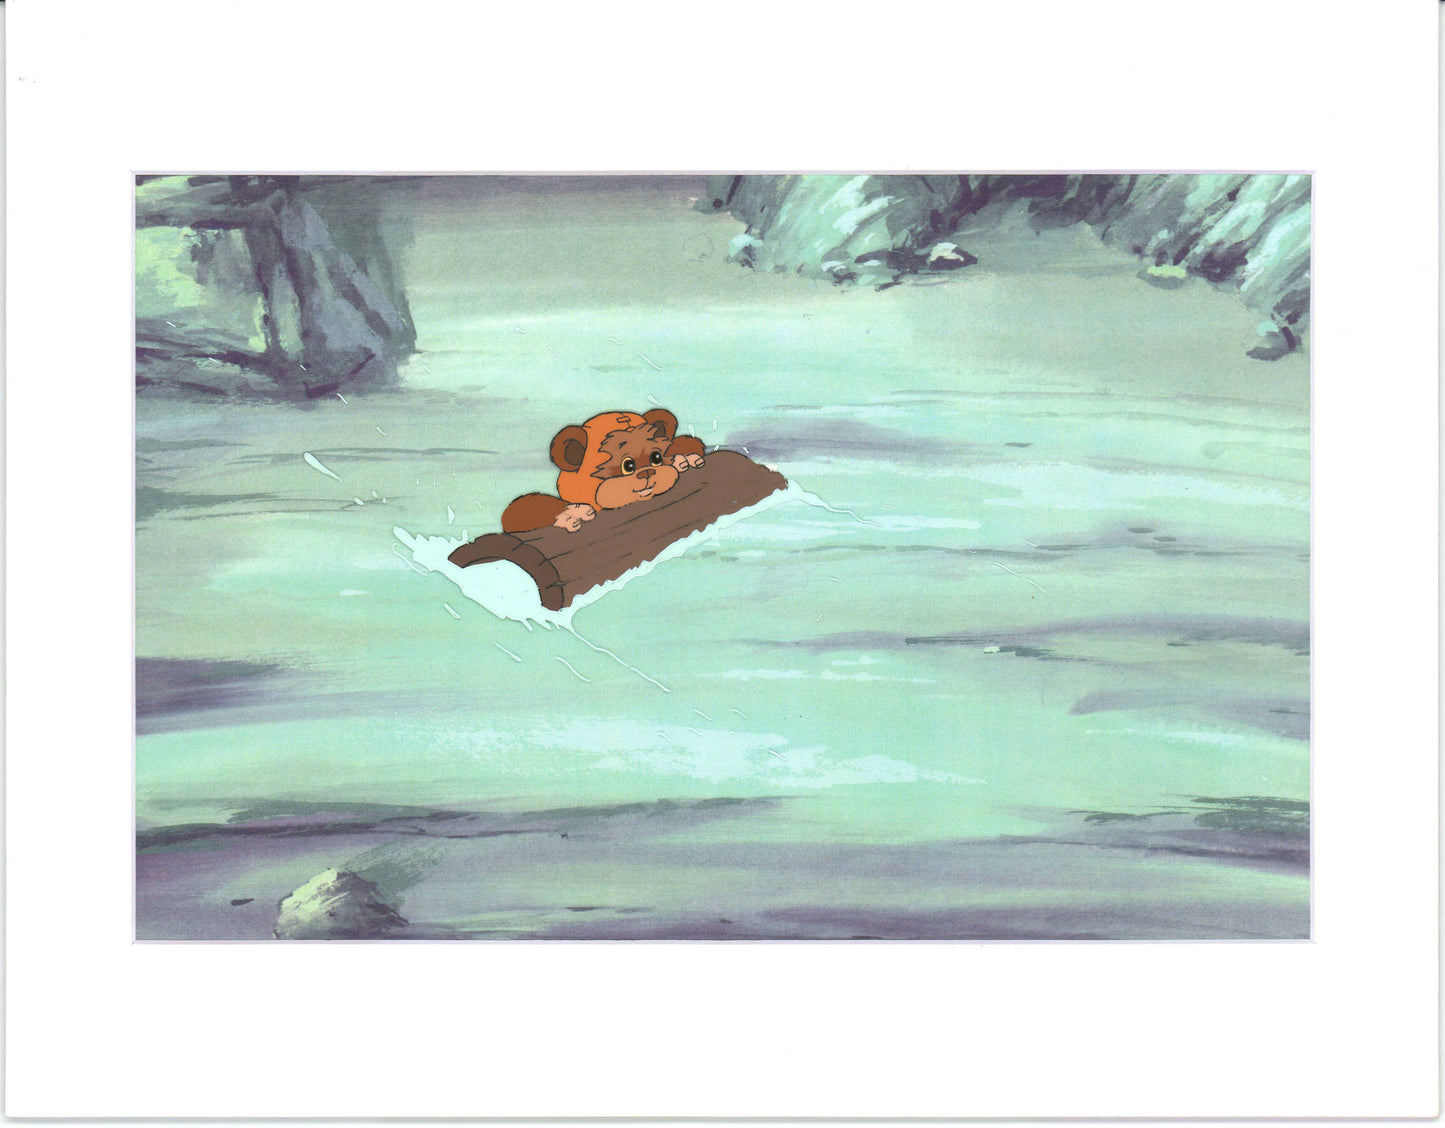 Star Wars: Ewoks Wicket from Season One Original Production Animation Cel and Drawing from Lucasfilm b5416